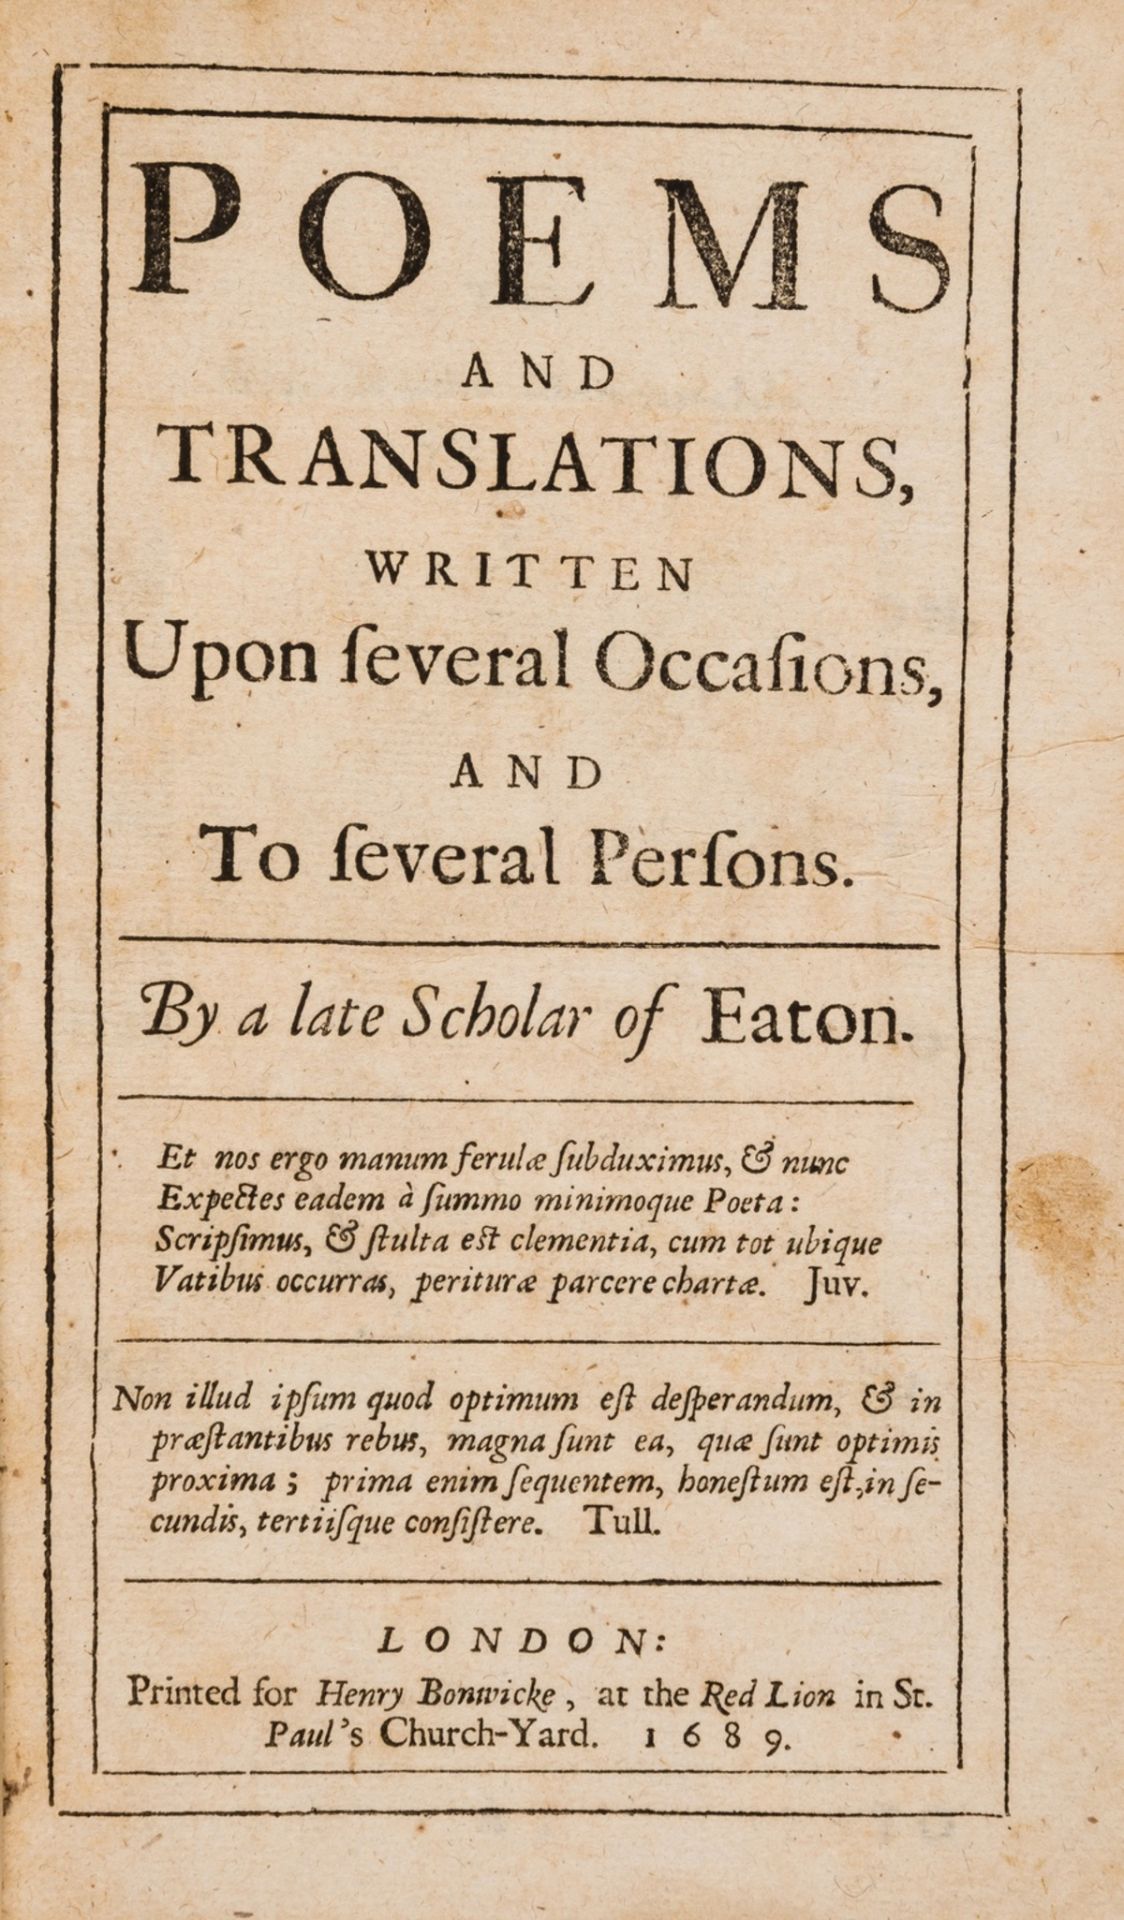 Goodall (Charles) Poems and Translations, first edition, Printed for Henry Bonwicke, 1689.